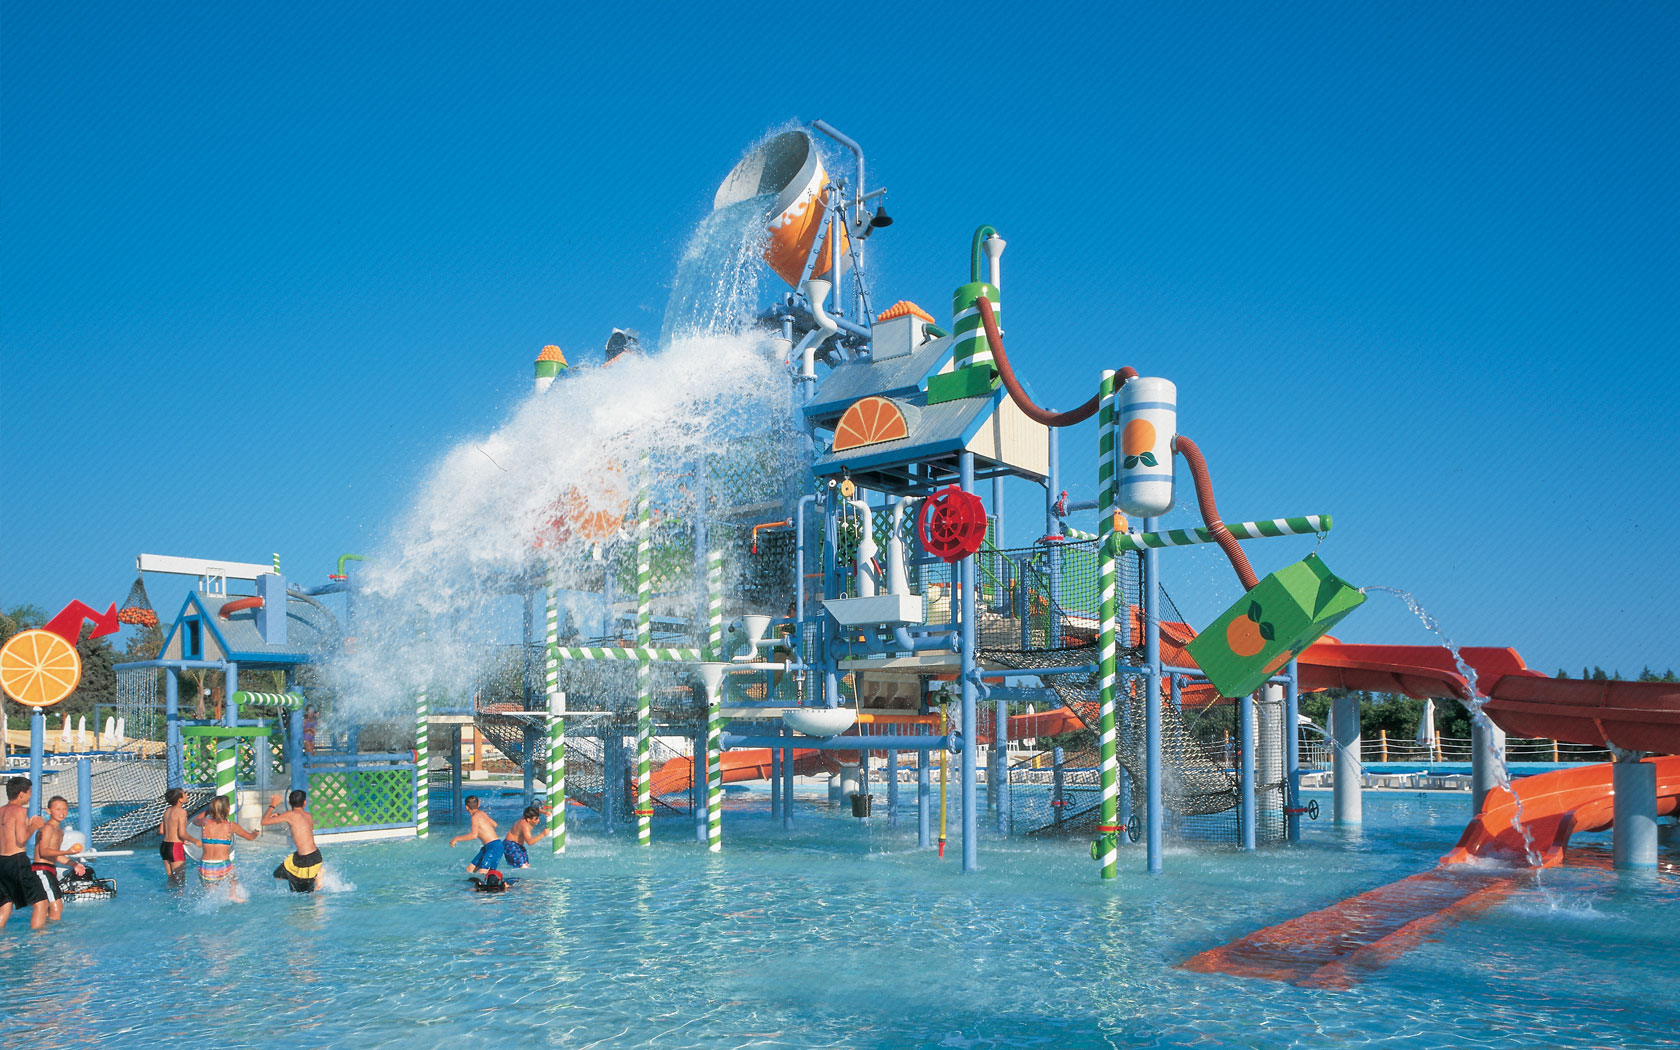 Water Parks Wallpaper High Quality